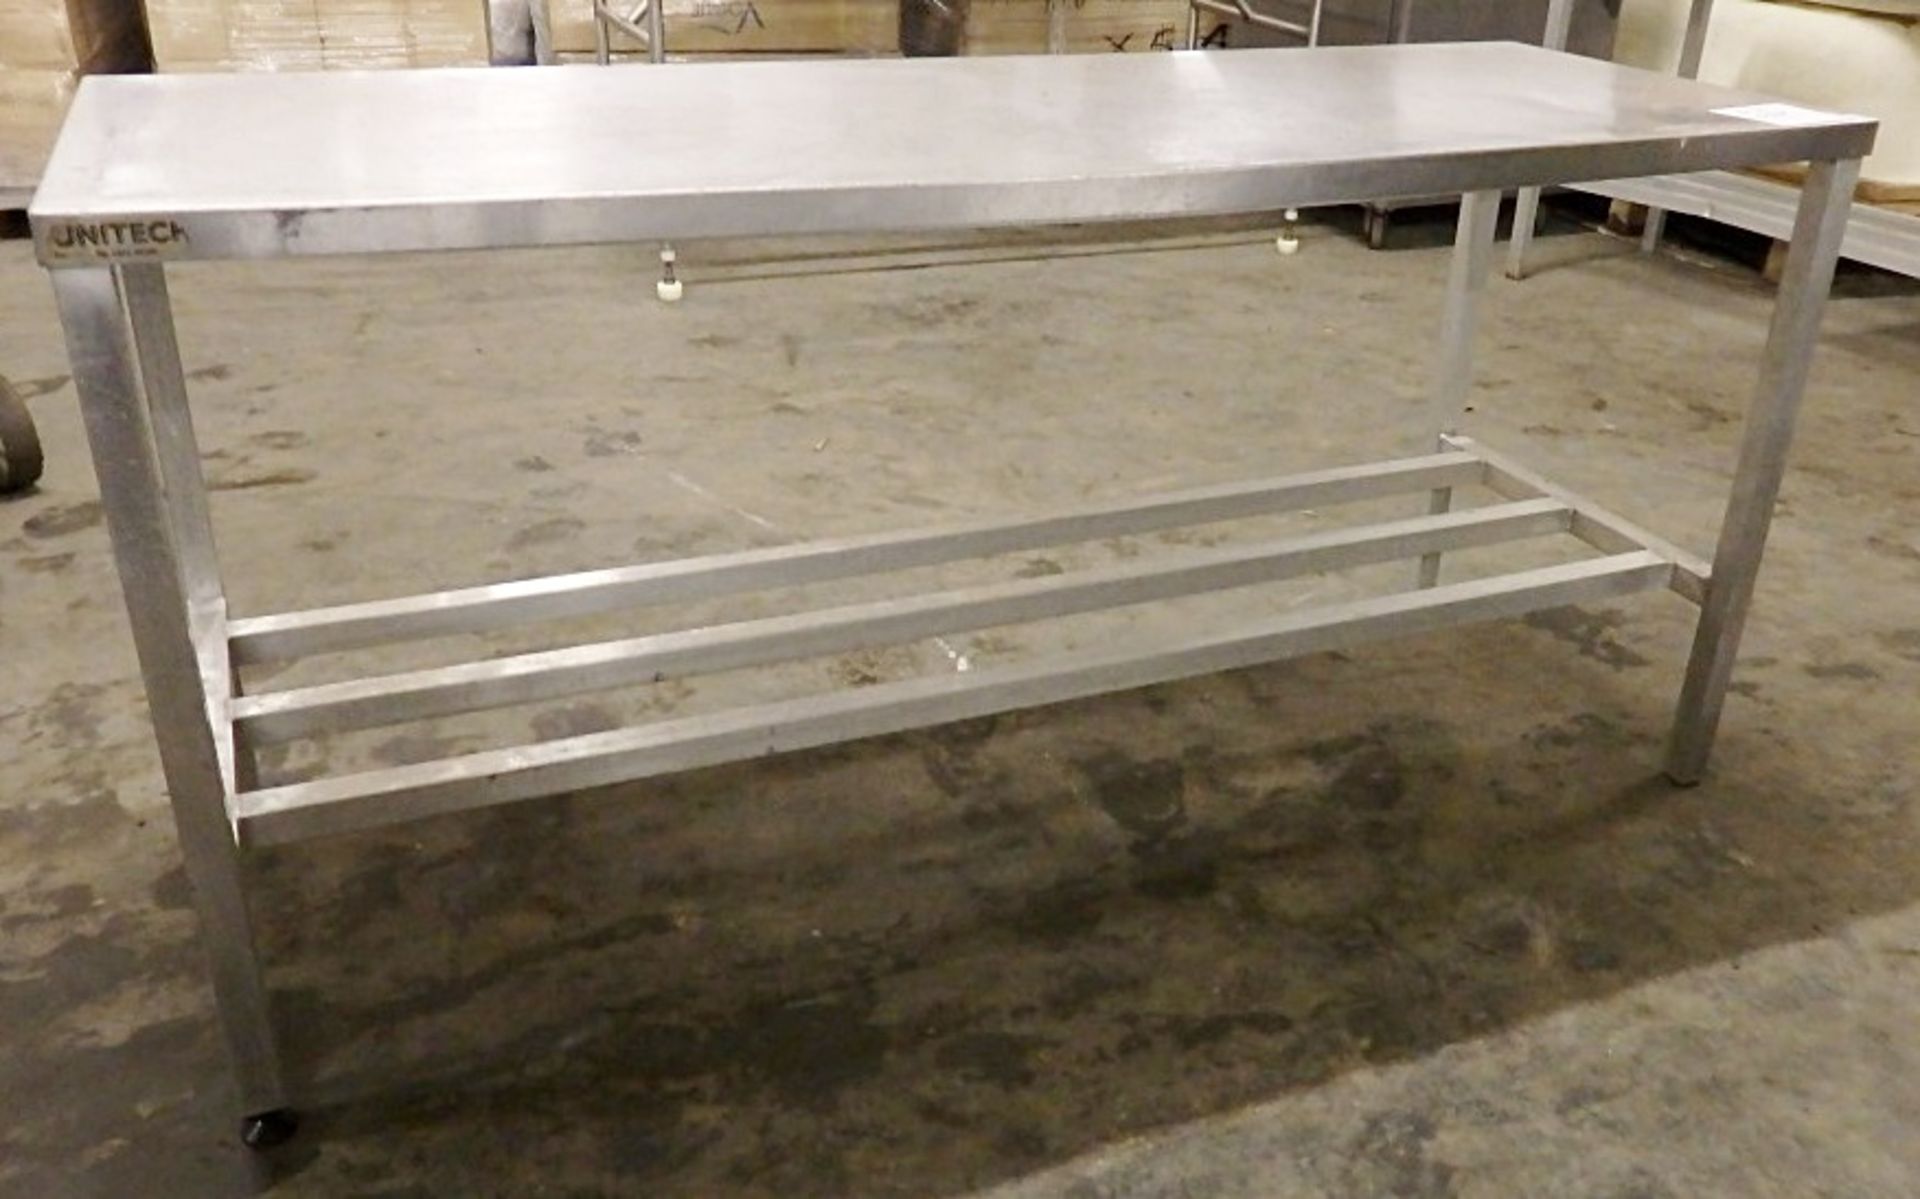 1 x Long Stainless Steel Catering Preparation Table Frame - Dimensions: W176 x D62 x H84cm - Solid - Image 4 of 5